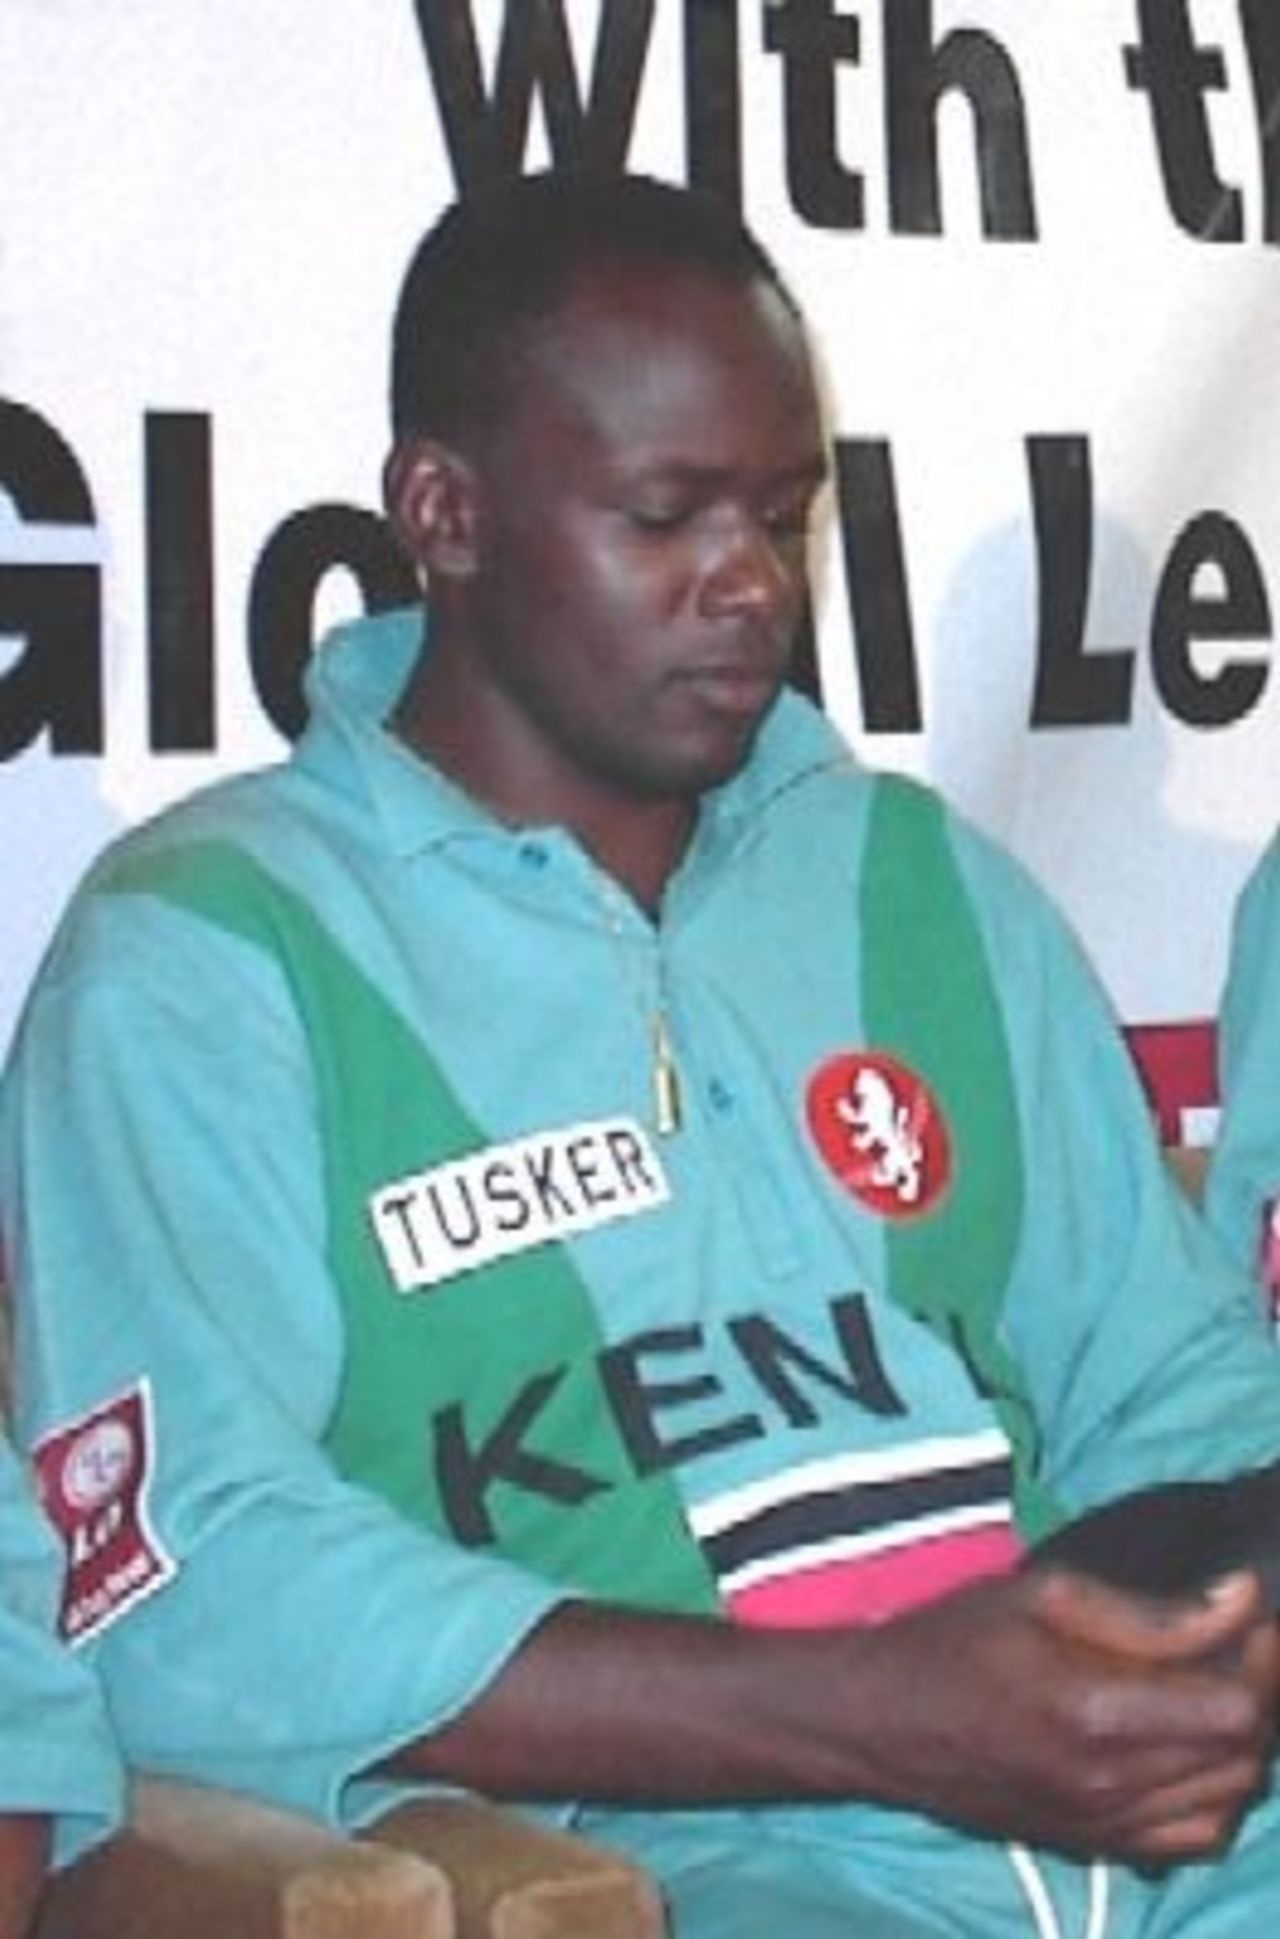 Kenya Captain Maurice Odumbe, disappointed with losing to South Africa in the 1999 LG Cup in Nairobi, Kenya